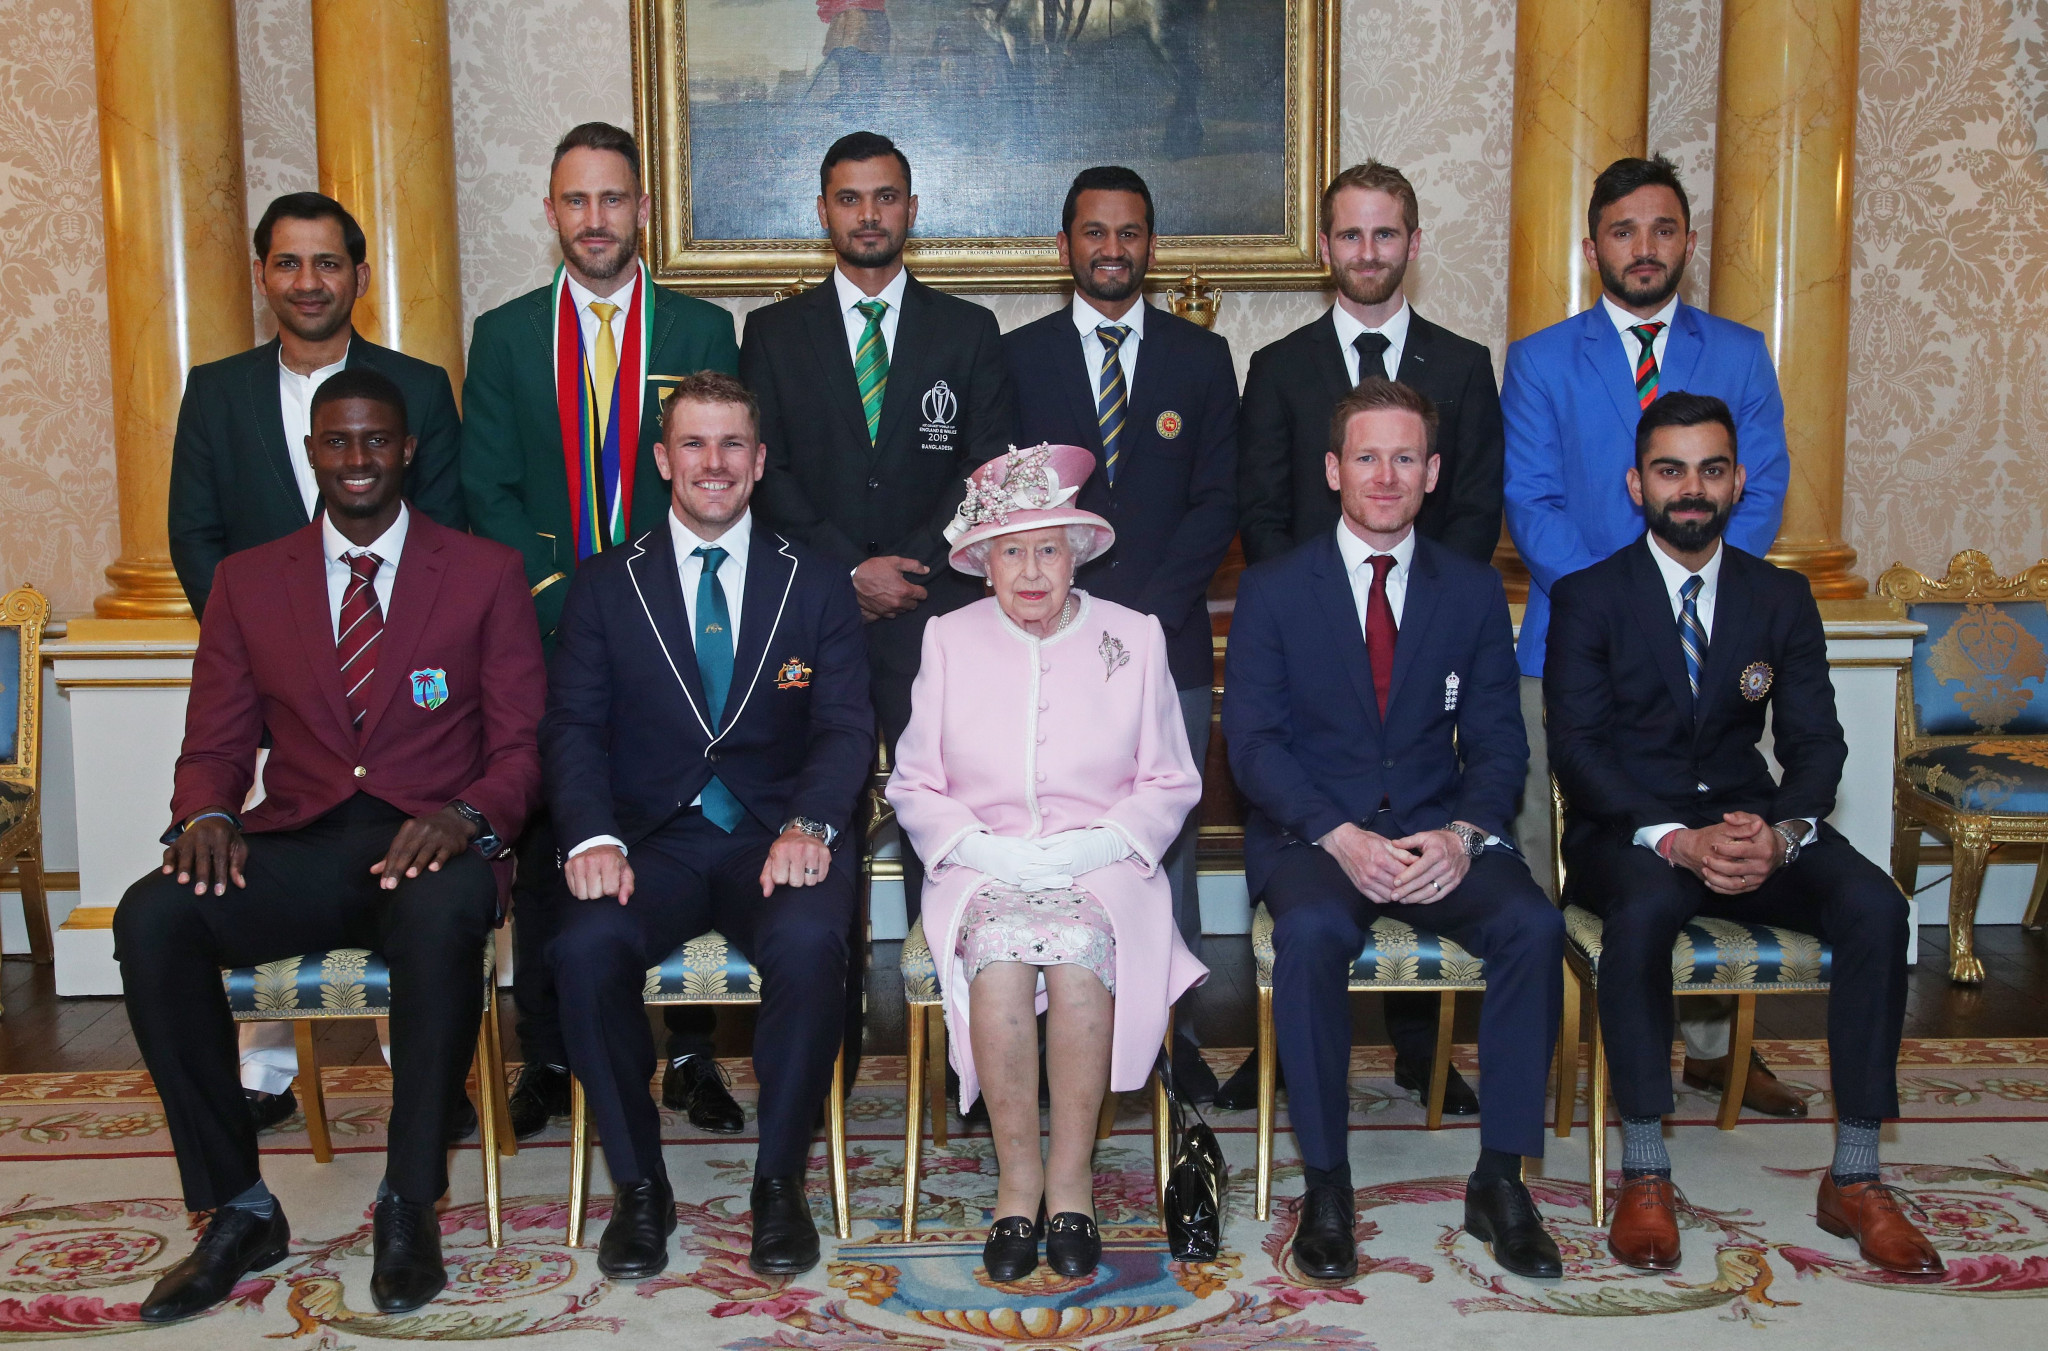 The captains of the 10 ICC Cricket World Cup teams met the Queen at Buckingham Palace as part of an opening party for the event on the eve of the first match of the tournament ©Getty Images